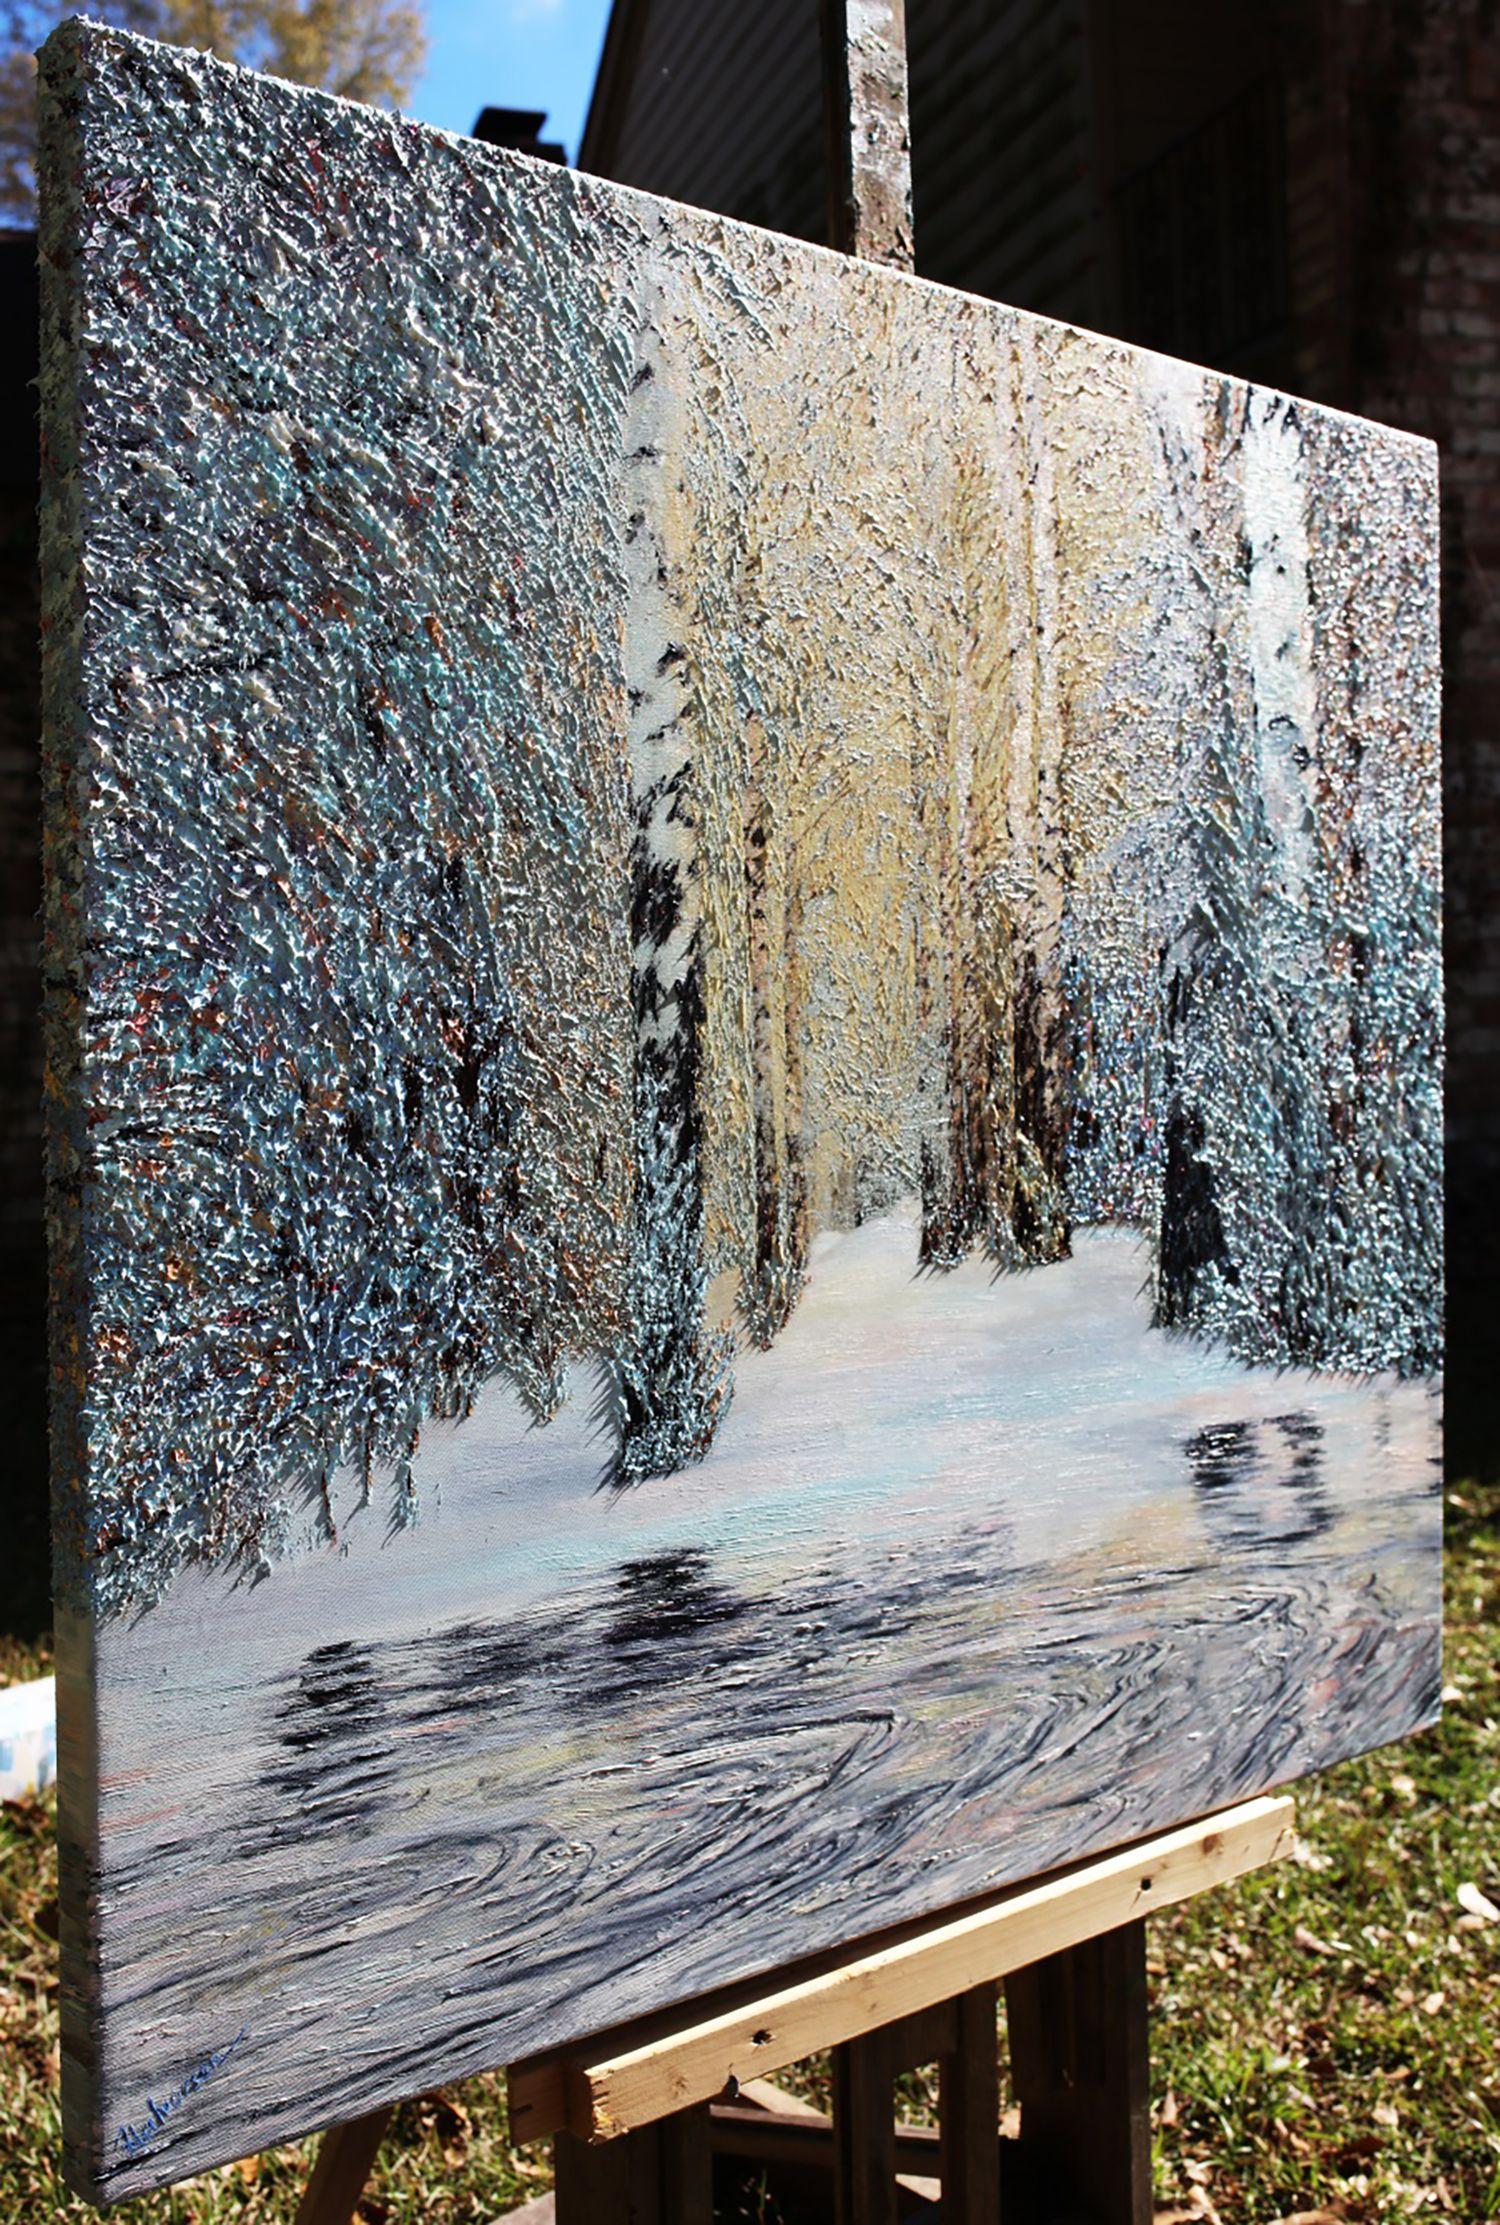 : â€œOnly the sun, its energy cascading upon the winterâ€™s frost, can create the aura of gold from the crispiest white. The feeling is cold heatâ€.  The painting is executed in Clear Impressionism style in thick oils with bright colors, fluid